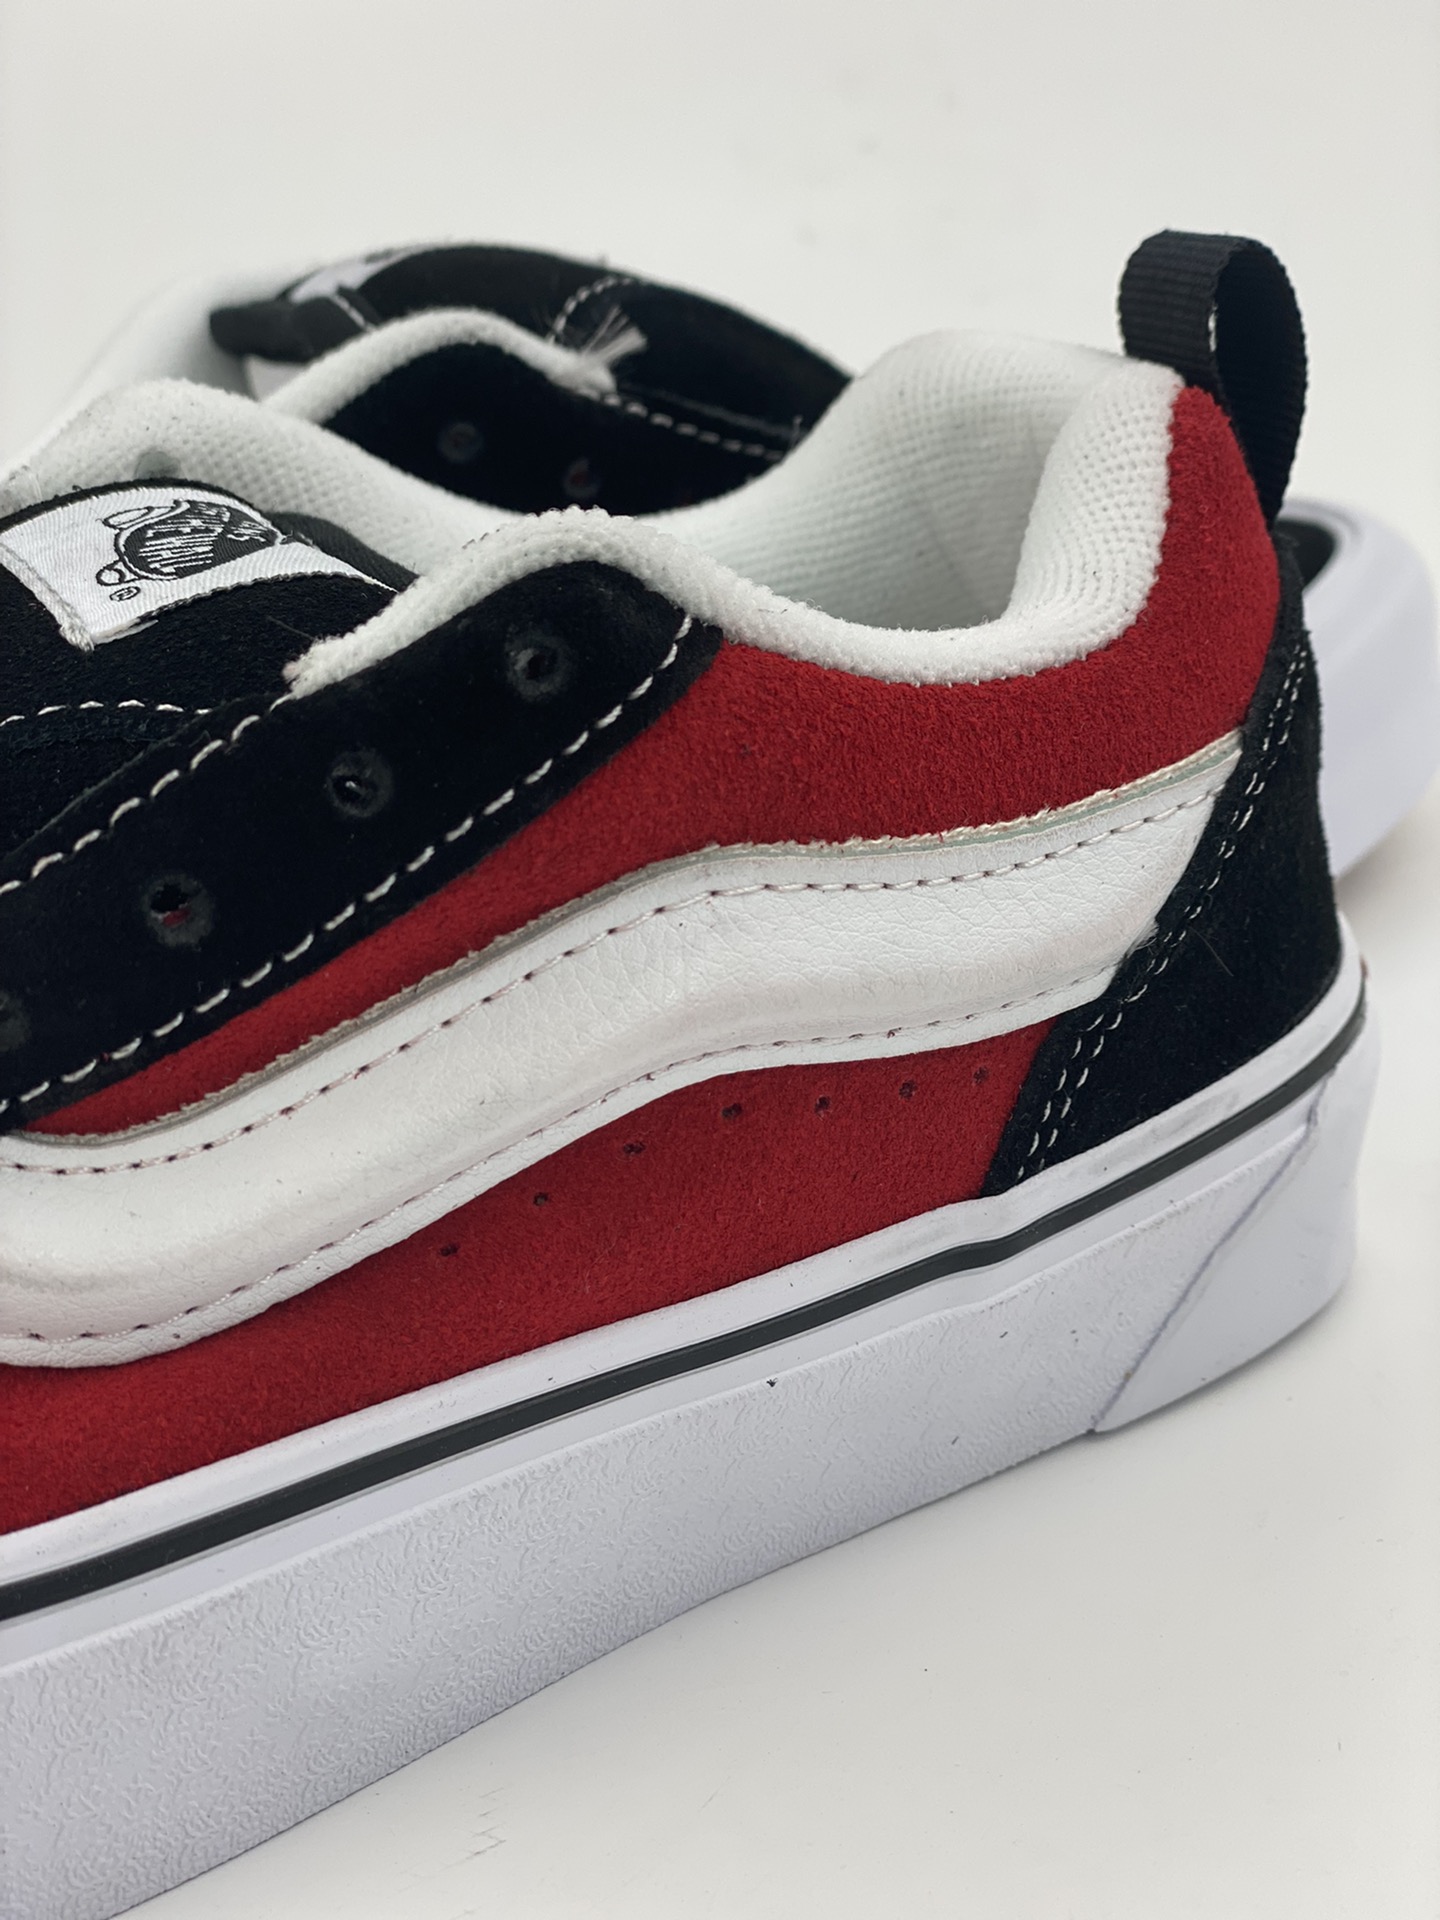 Vans official Knu Skool black and red contrasting American classic color matching men's and women's shoes